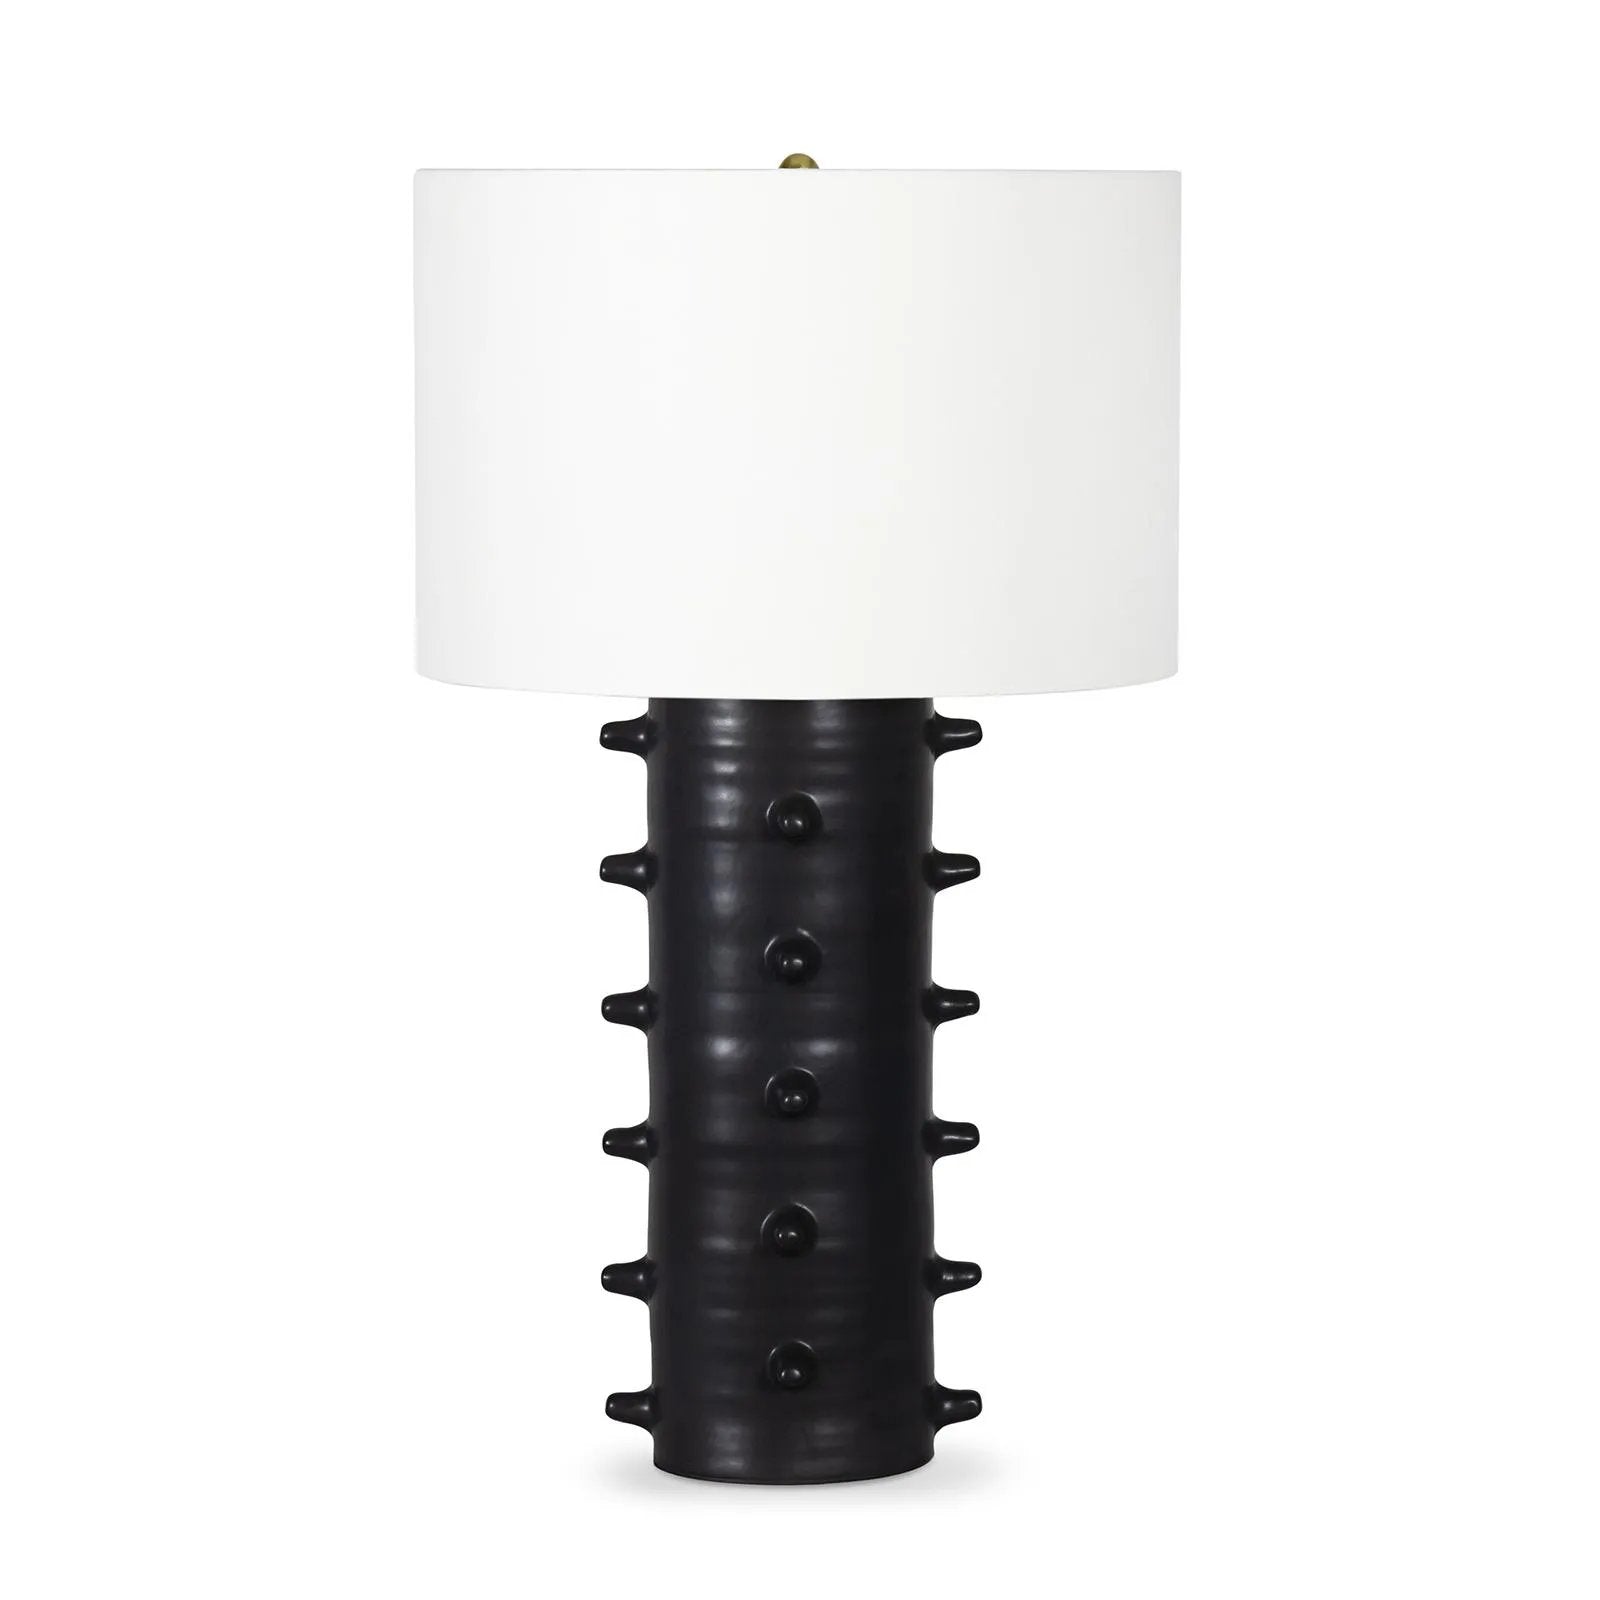 The Spruce Ceramic Table Lamp blends modern aesthetics and functional design. With a rock n' roll edge, the lamp is composed of a sleek black base with distinctive protruding nodules, creating the effect of a piece of art.  Perfect for bedside tables, home office or living room to add a unique touch. Amethyst Home provides interior design, new home construction design consulting, vintage area rugs, and lighting in the Park City metro area.